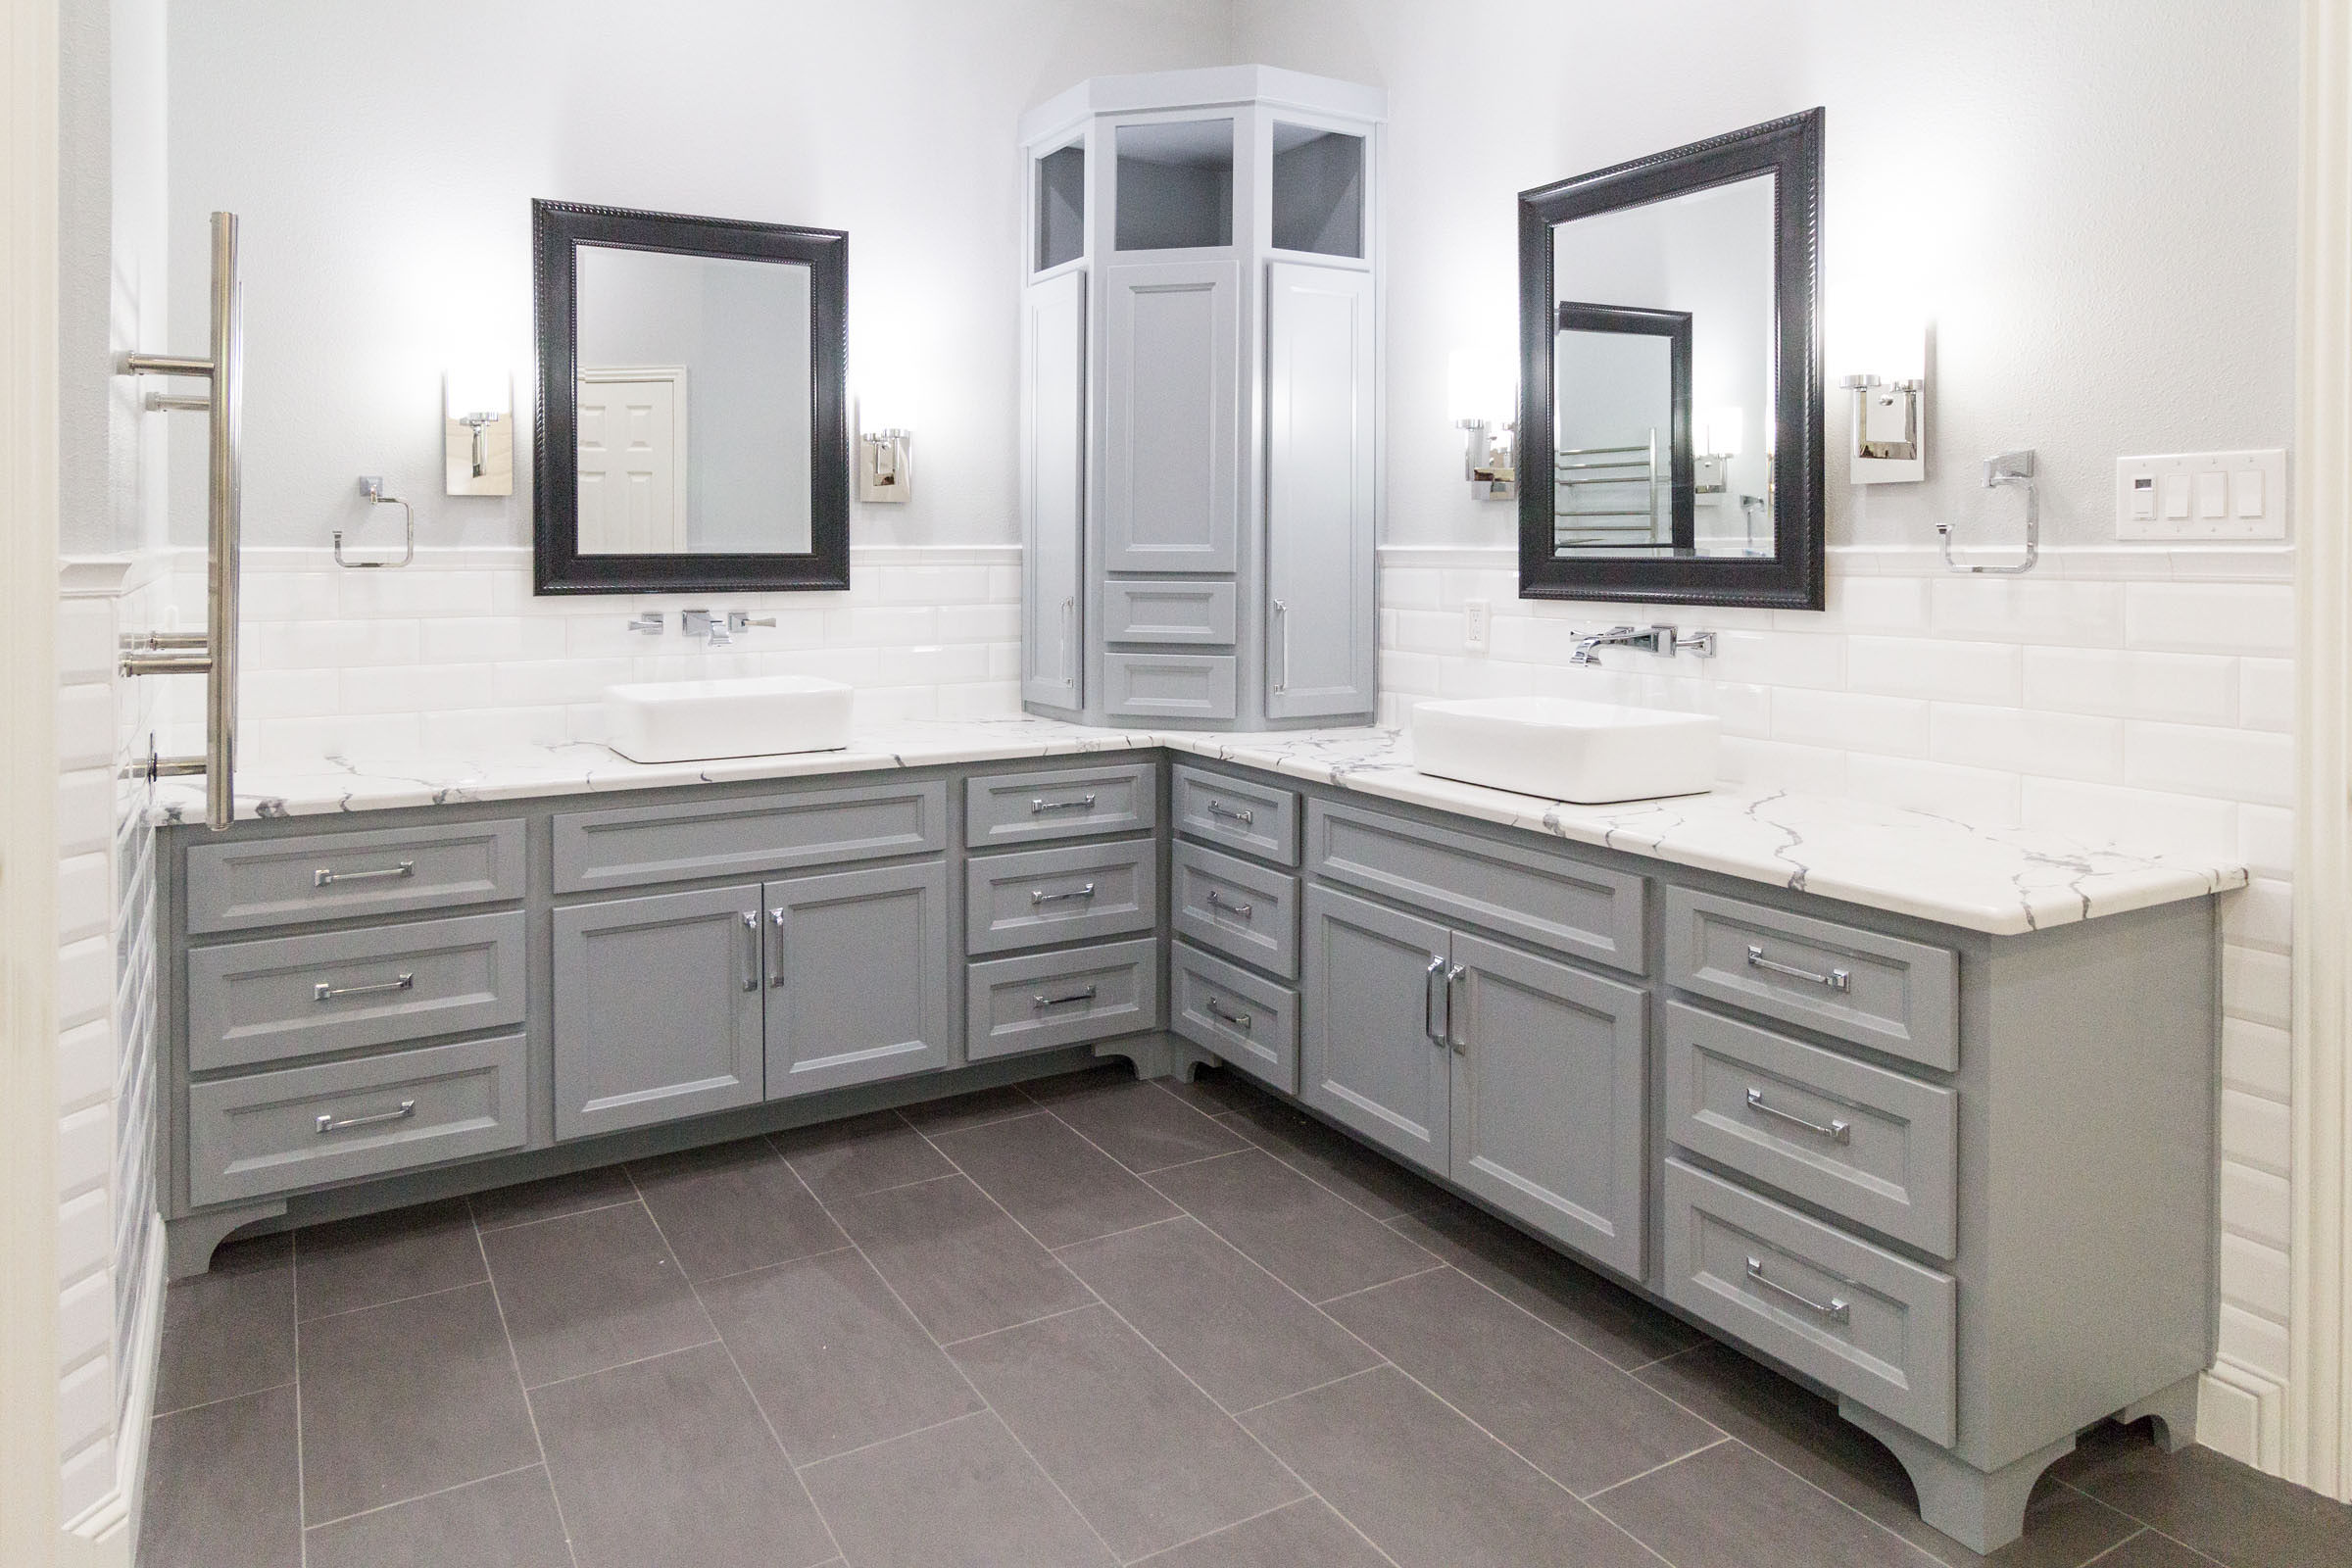 Contemporary styled bathroom remodel, grey shaker cabinets, white marble counters, dark grey trimmed vanity mirrors, jack and jill, white backsplash, grey paint